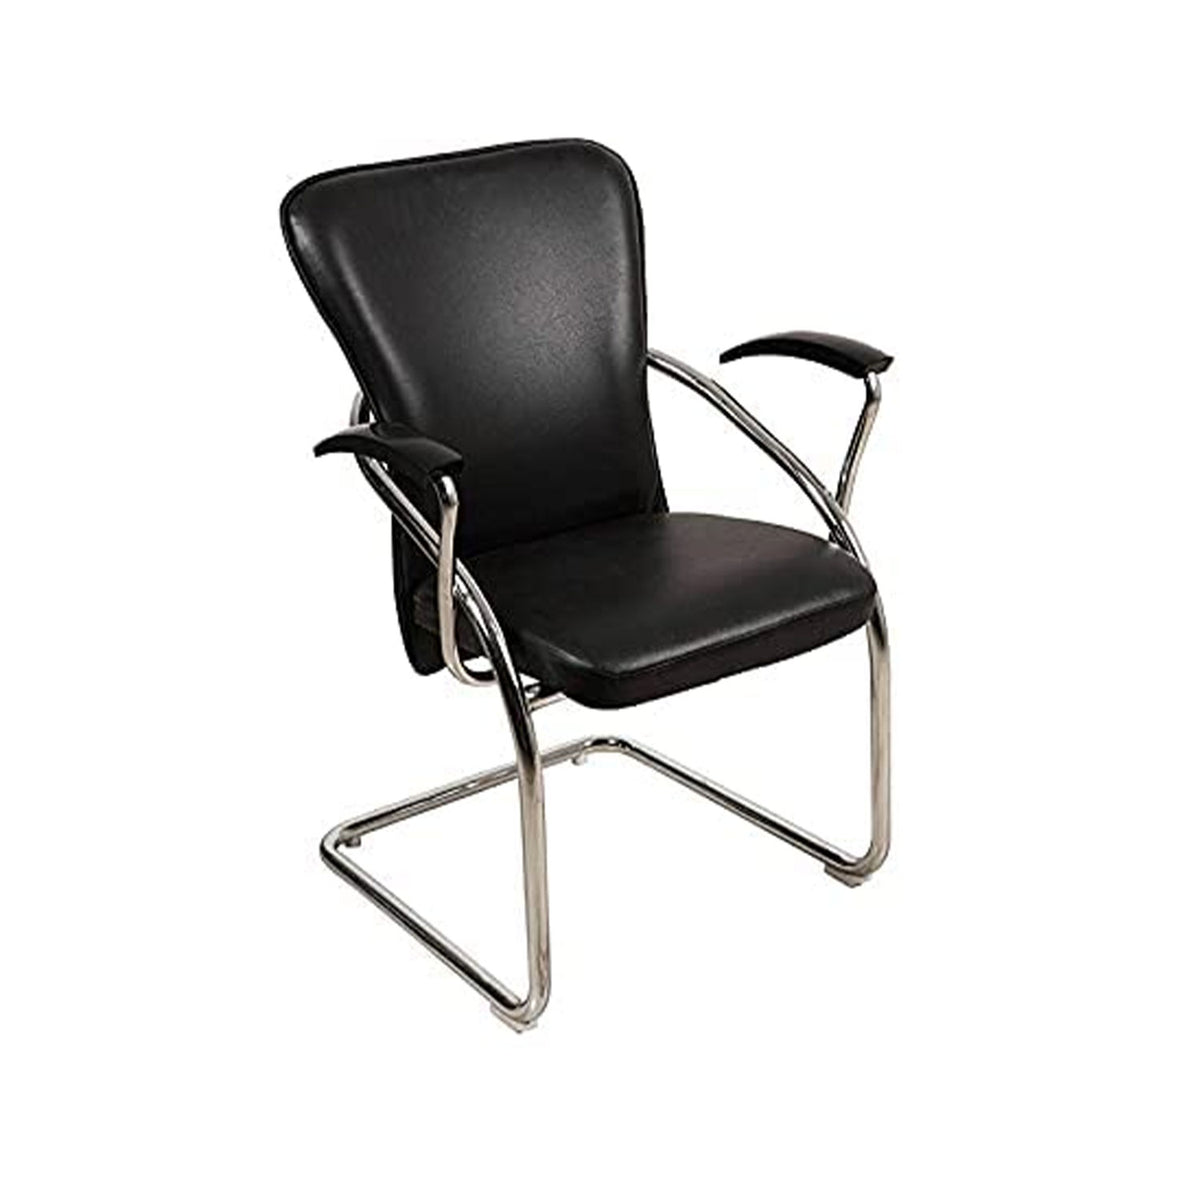 SmileSellers Office Chair Executive Visitor Chair with arm Rest with Steel Frame and Cushioned seat Back